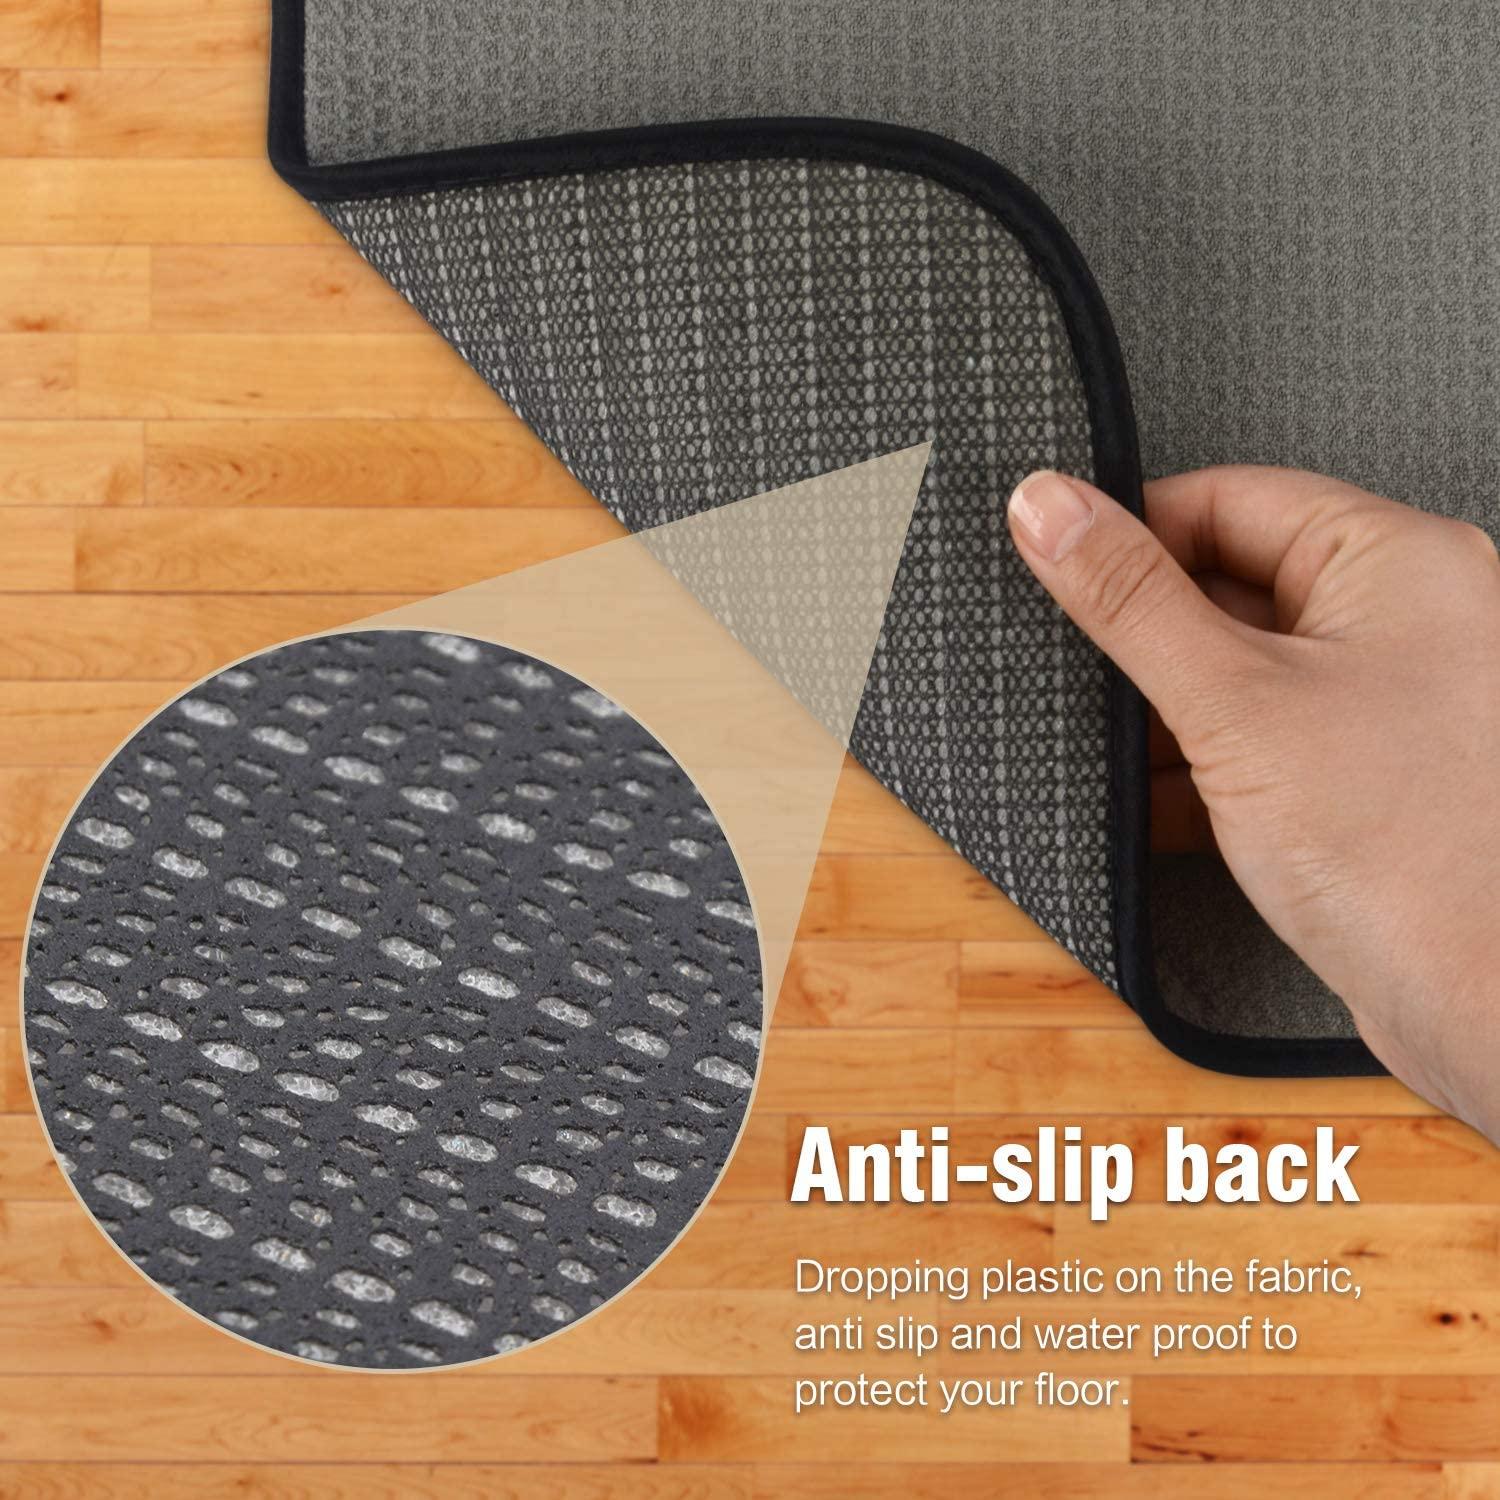 Dog Mat, Absorbent Rubber Backing Dog Mat for and Water Bowl, Quick Dry No  Stain